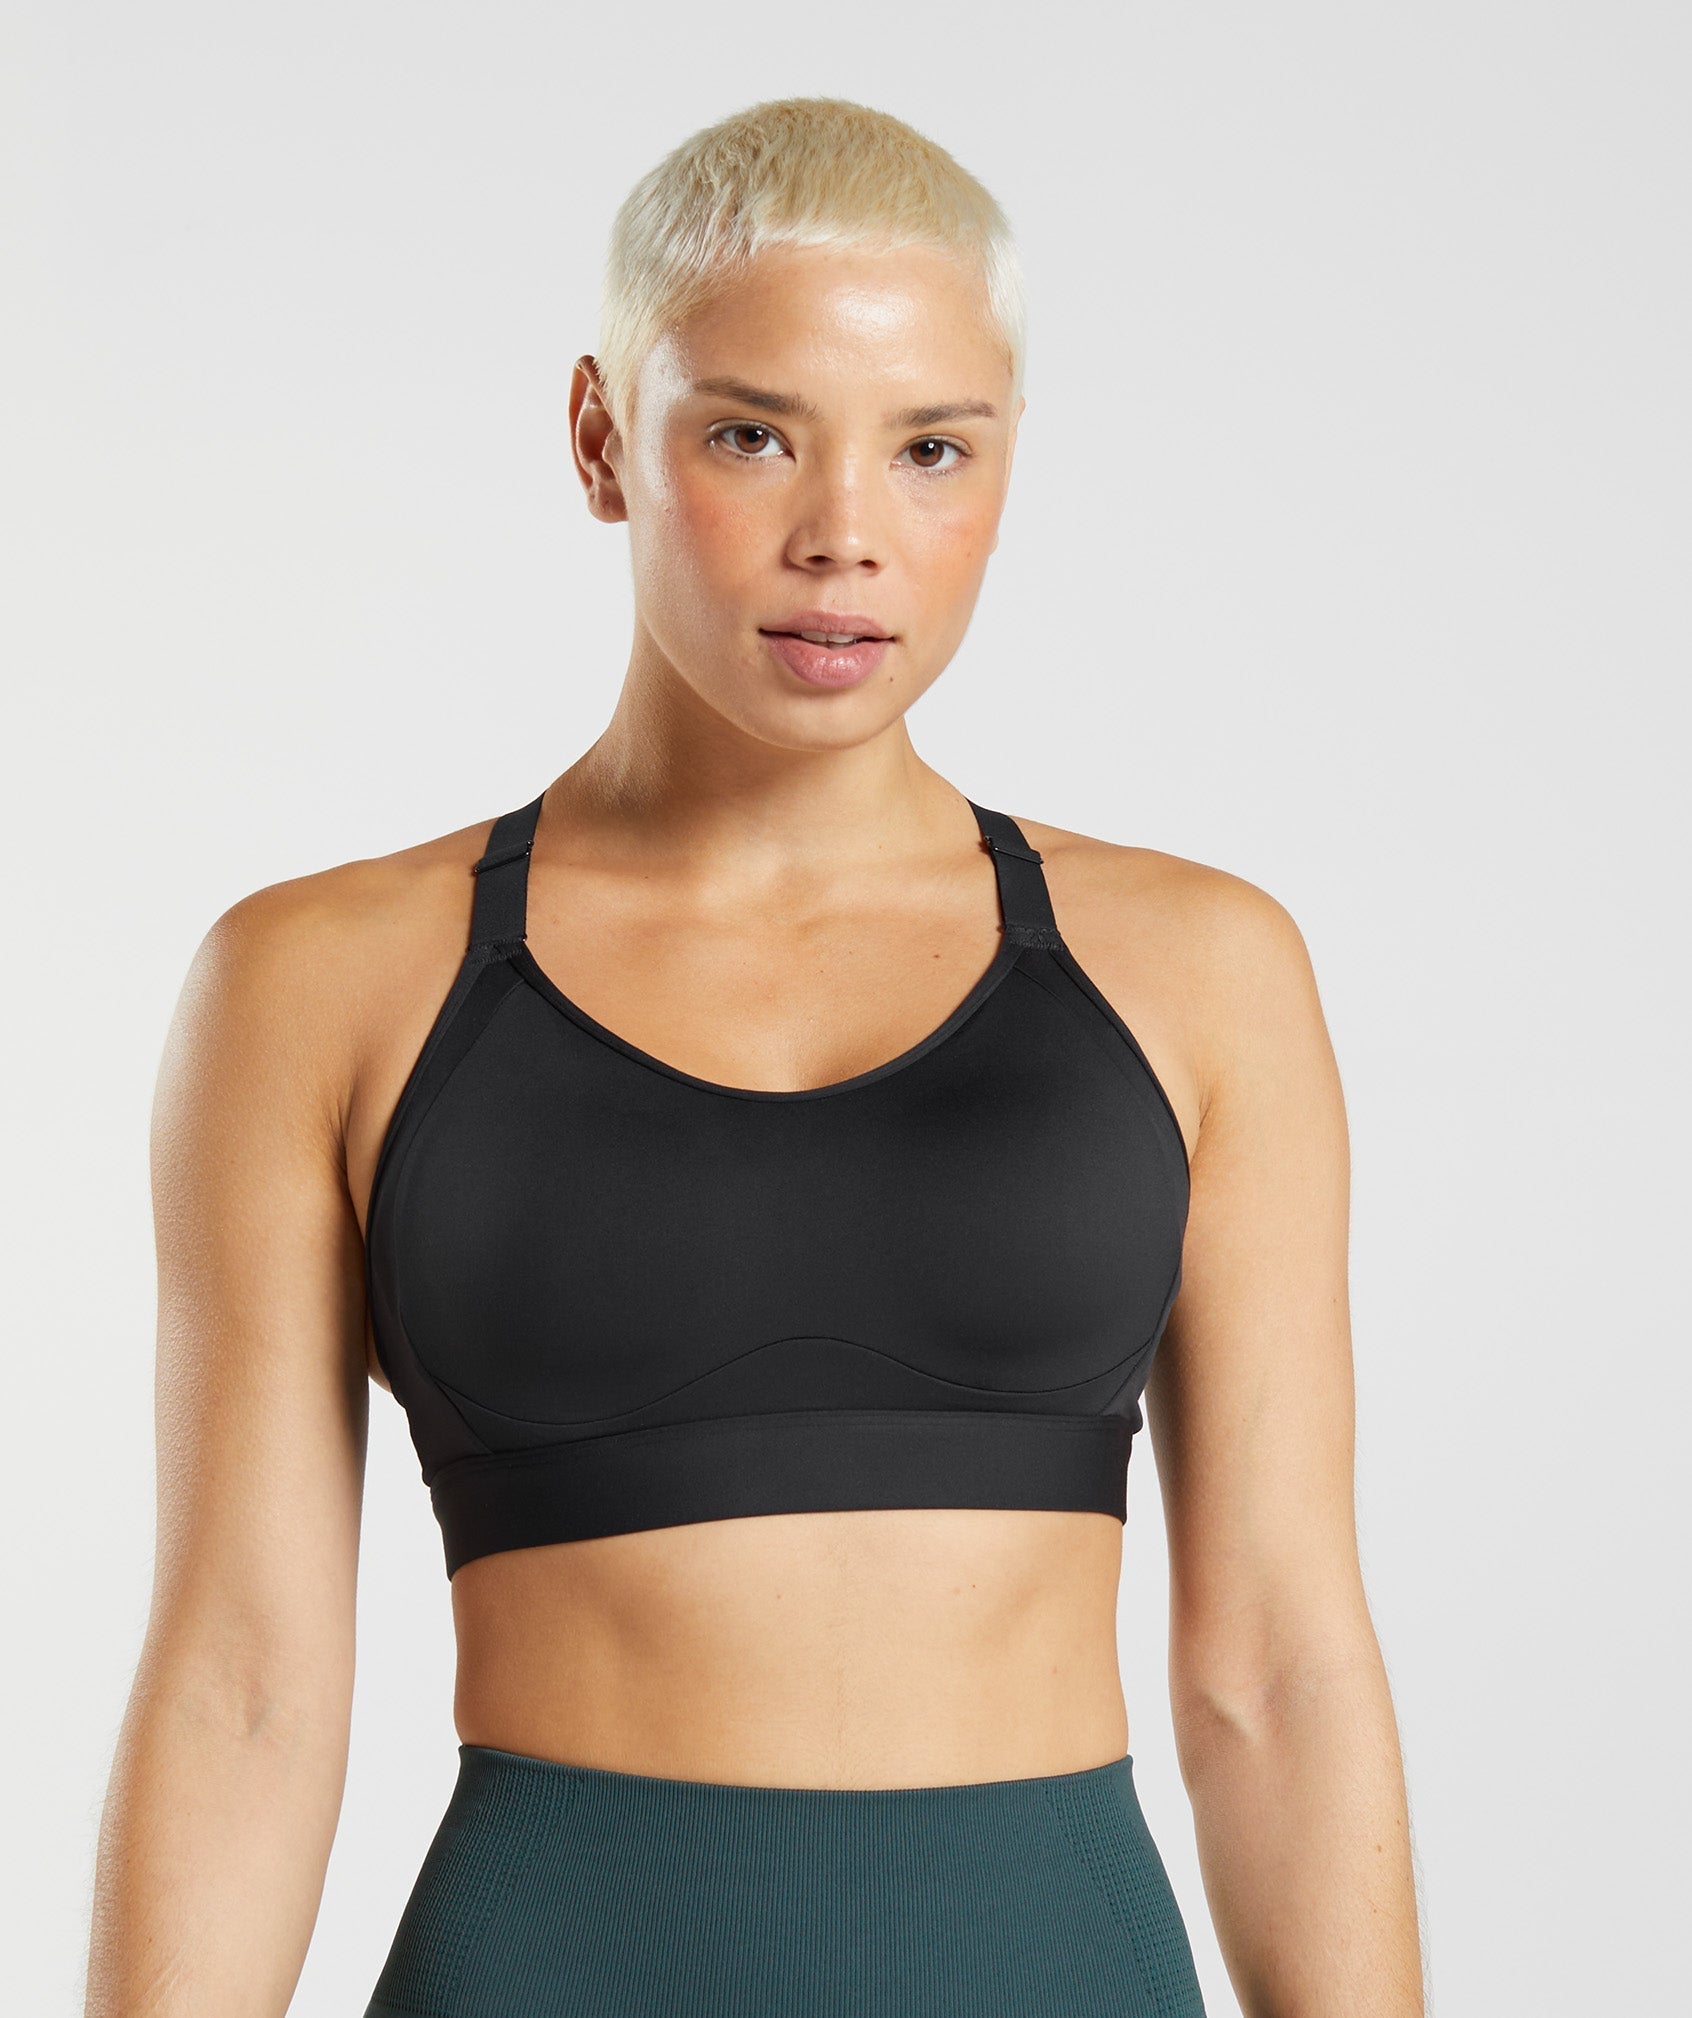 This trend of cutting the back of the new gymshark bra just isn't